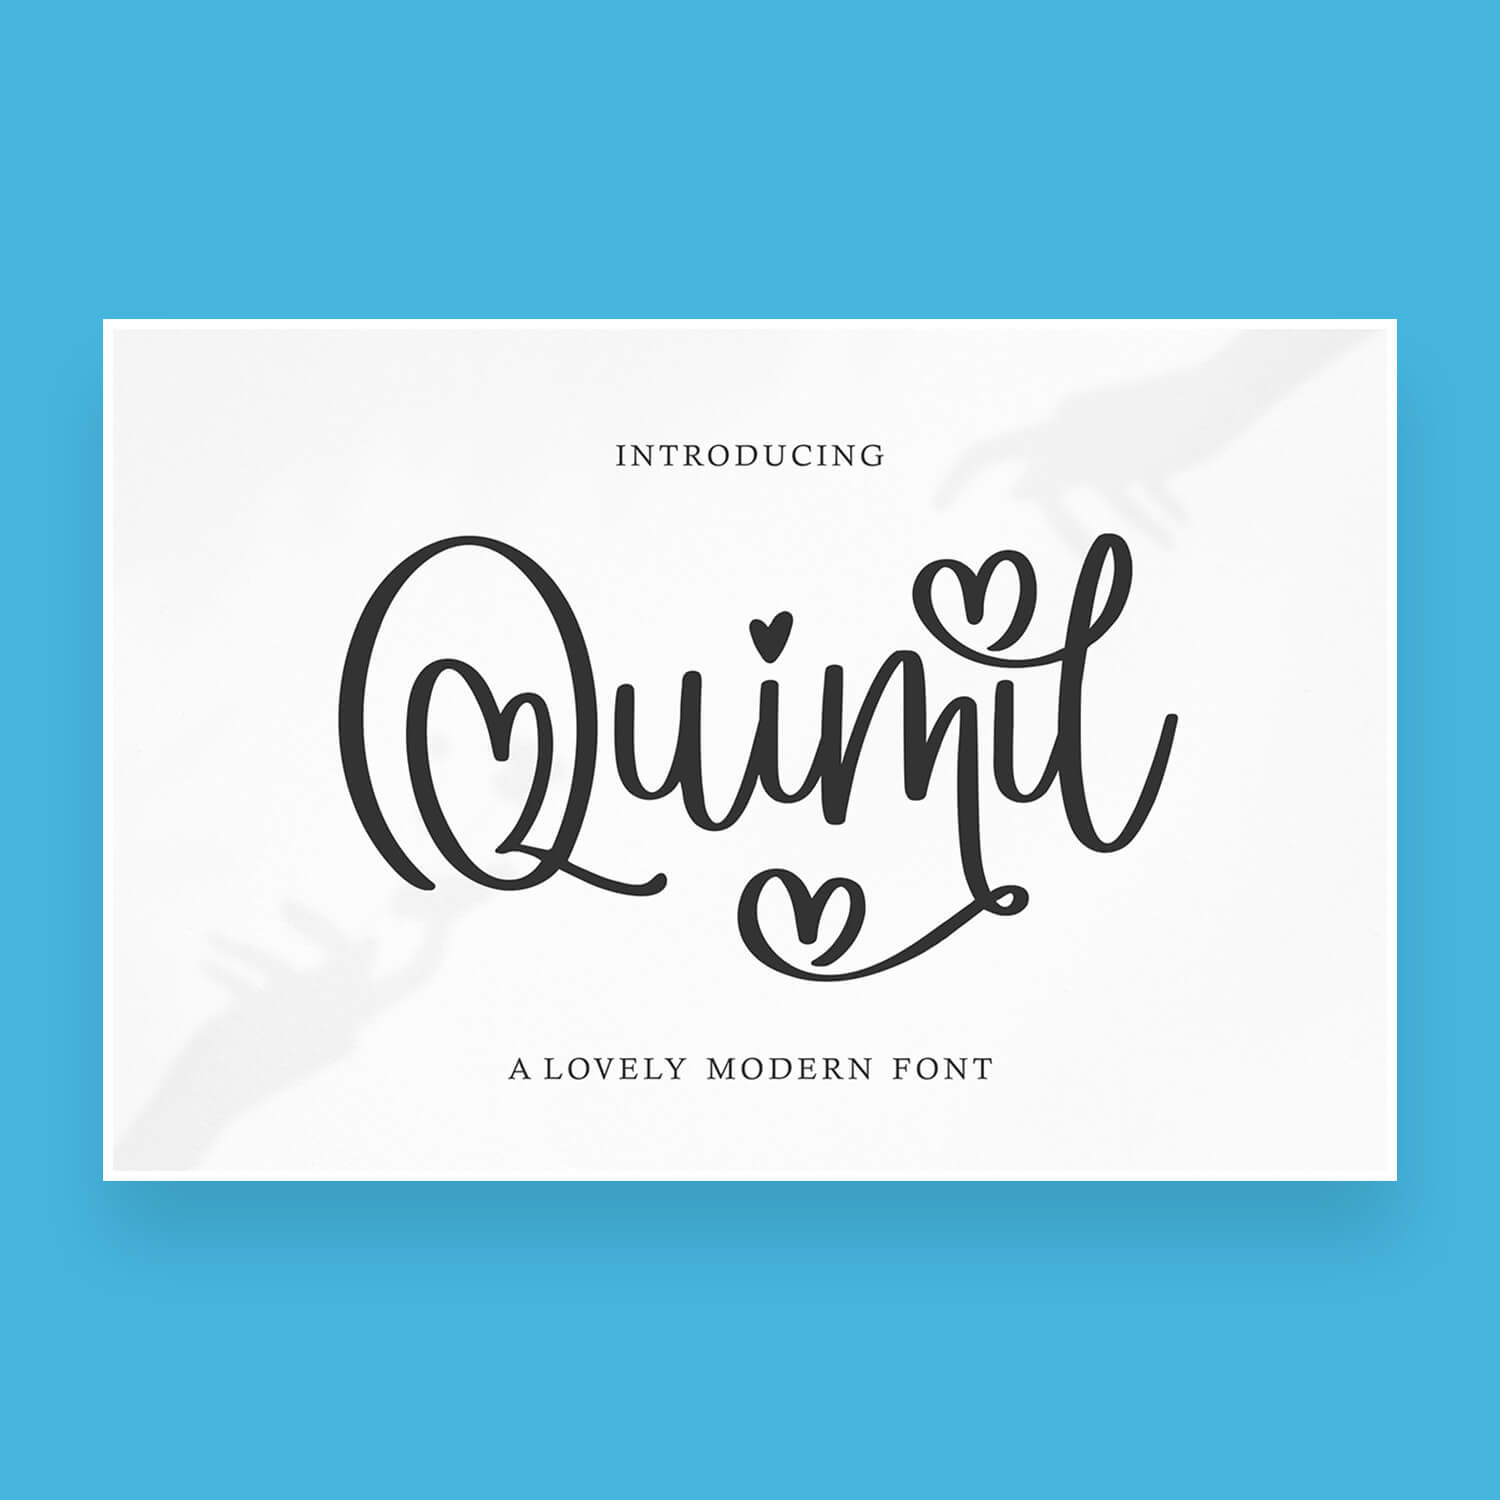 quimil a lovely modern handwritten font cover image.